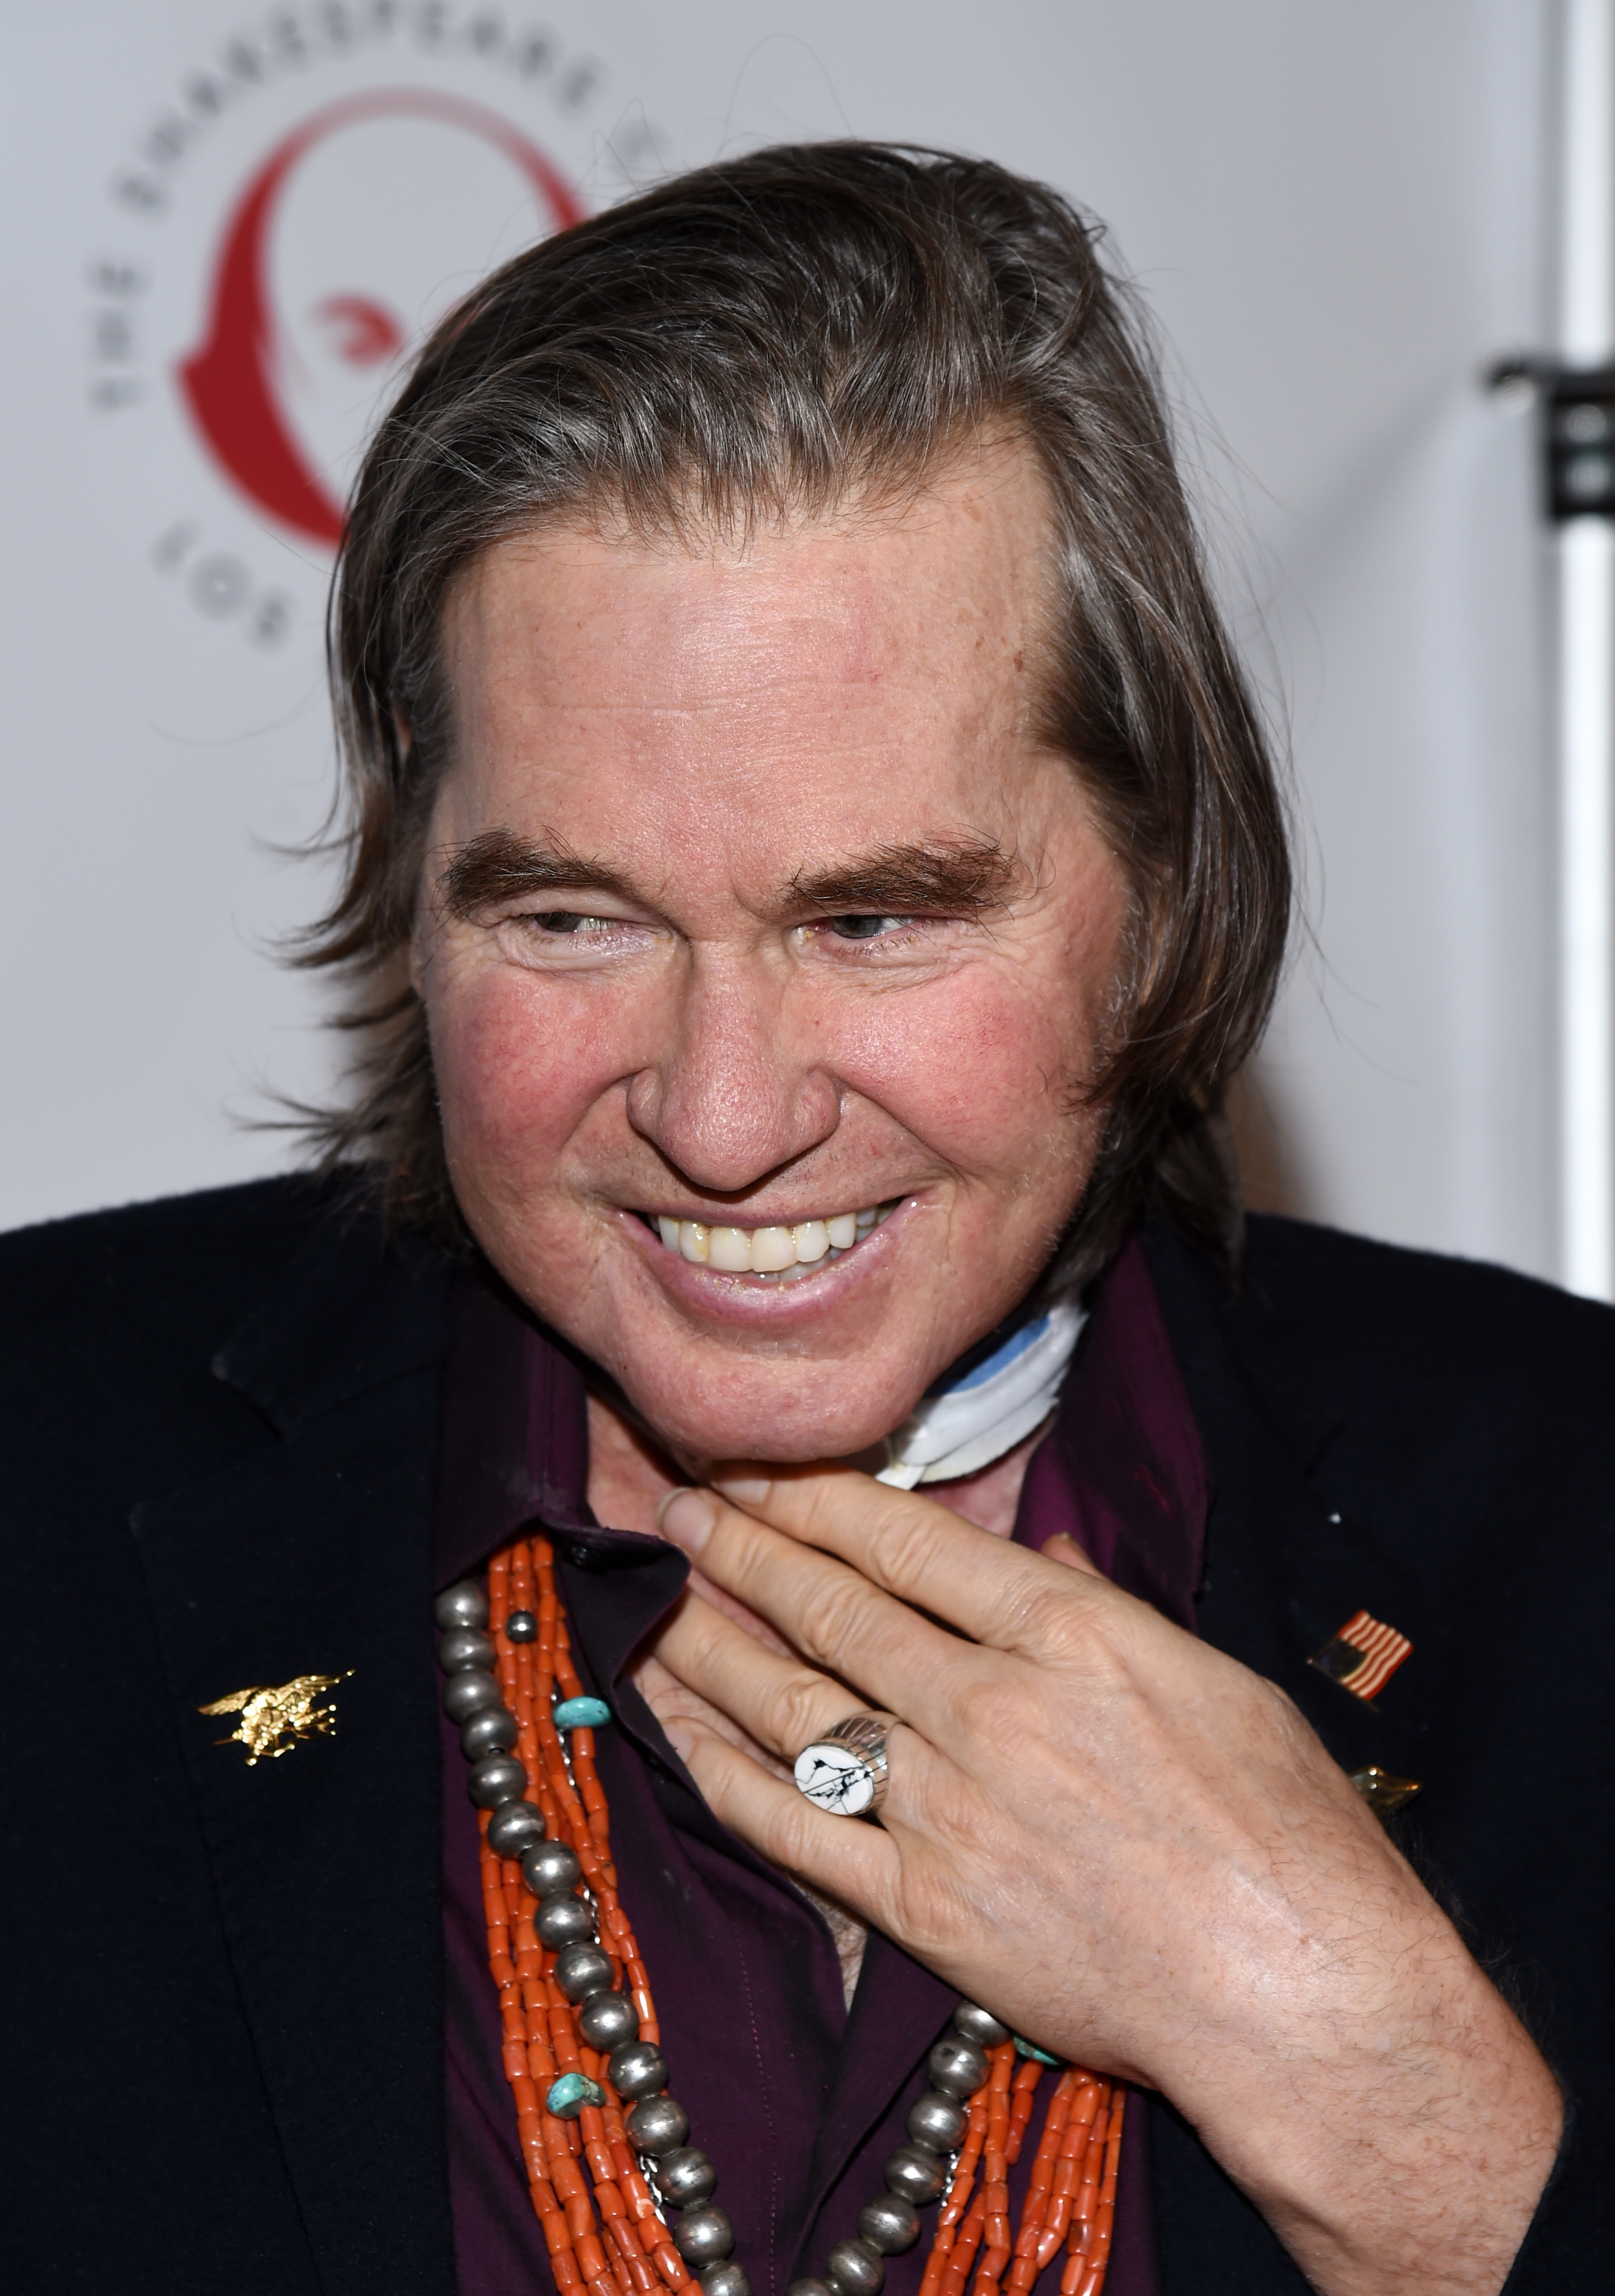 Val Kilmer at Simply Shakespeare's Live Read of "The Merchant Of Venice" in 2019 | Source: Getty Images